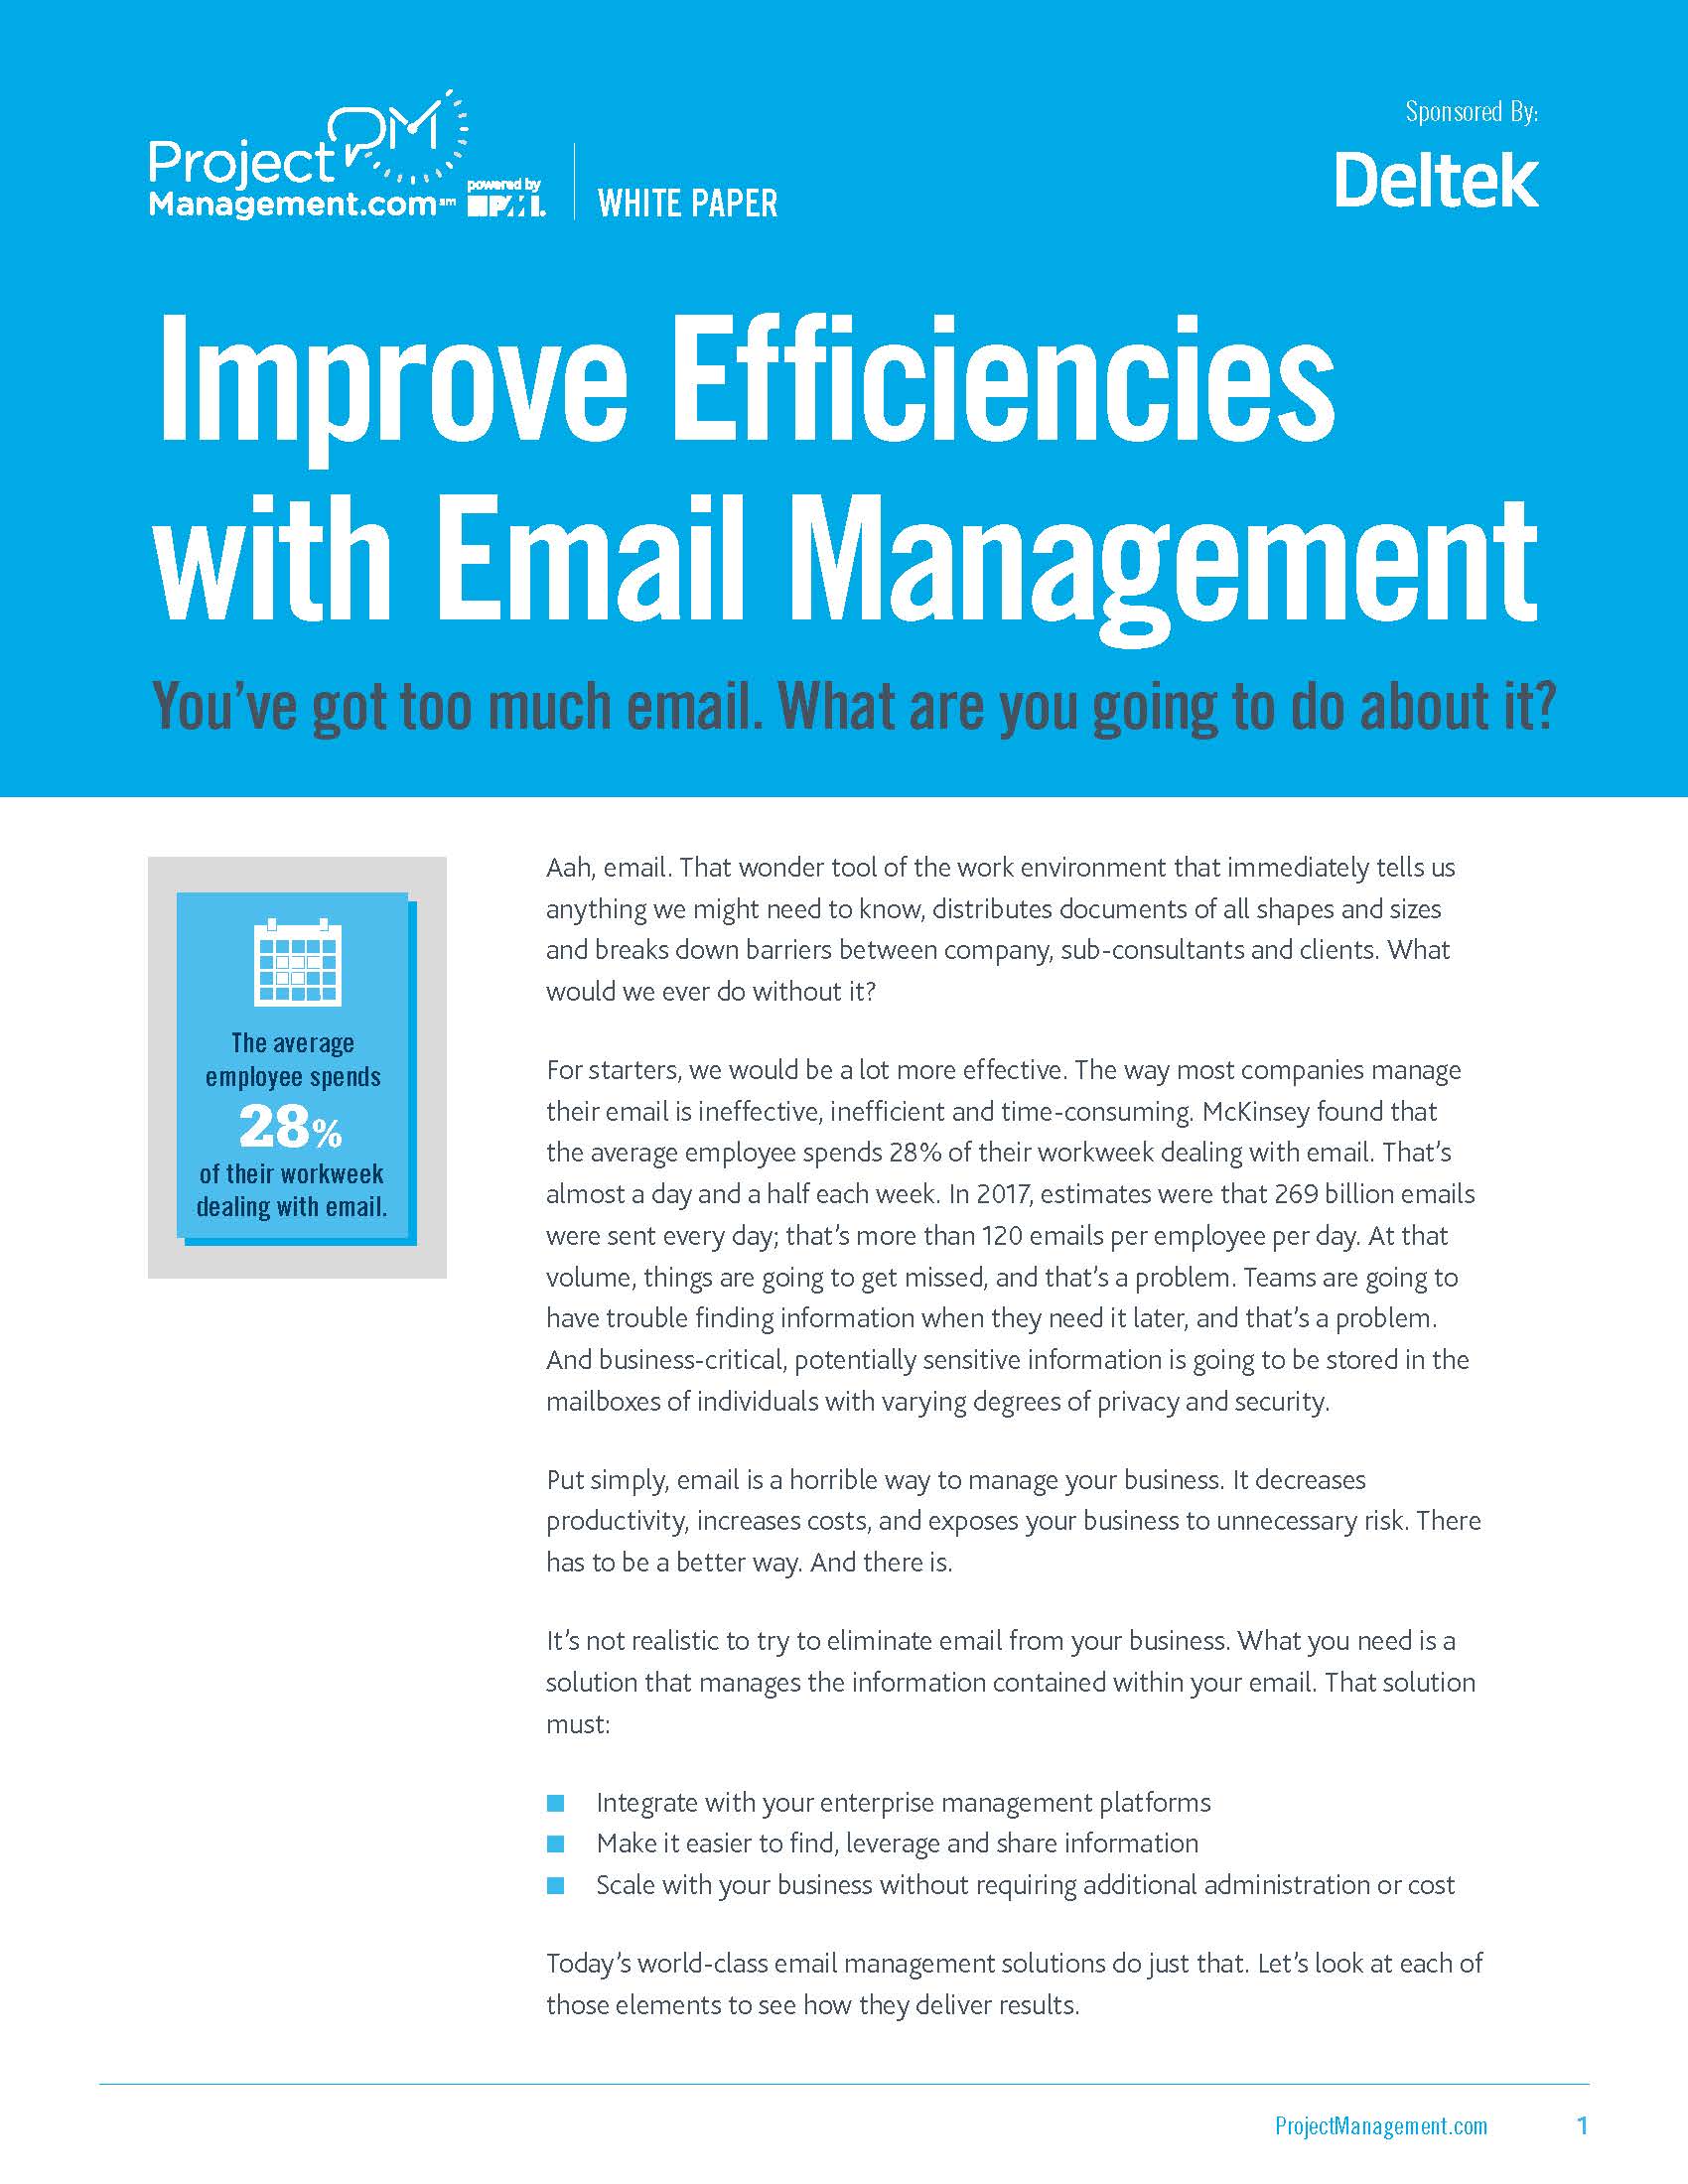 Email Management for AEC firms